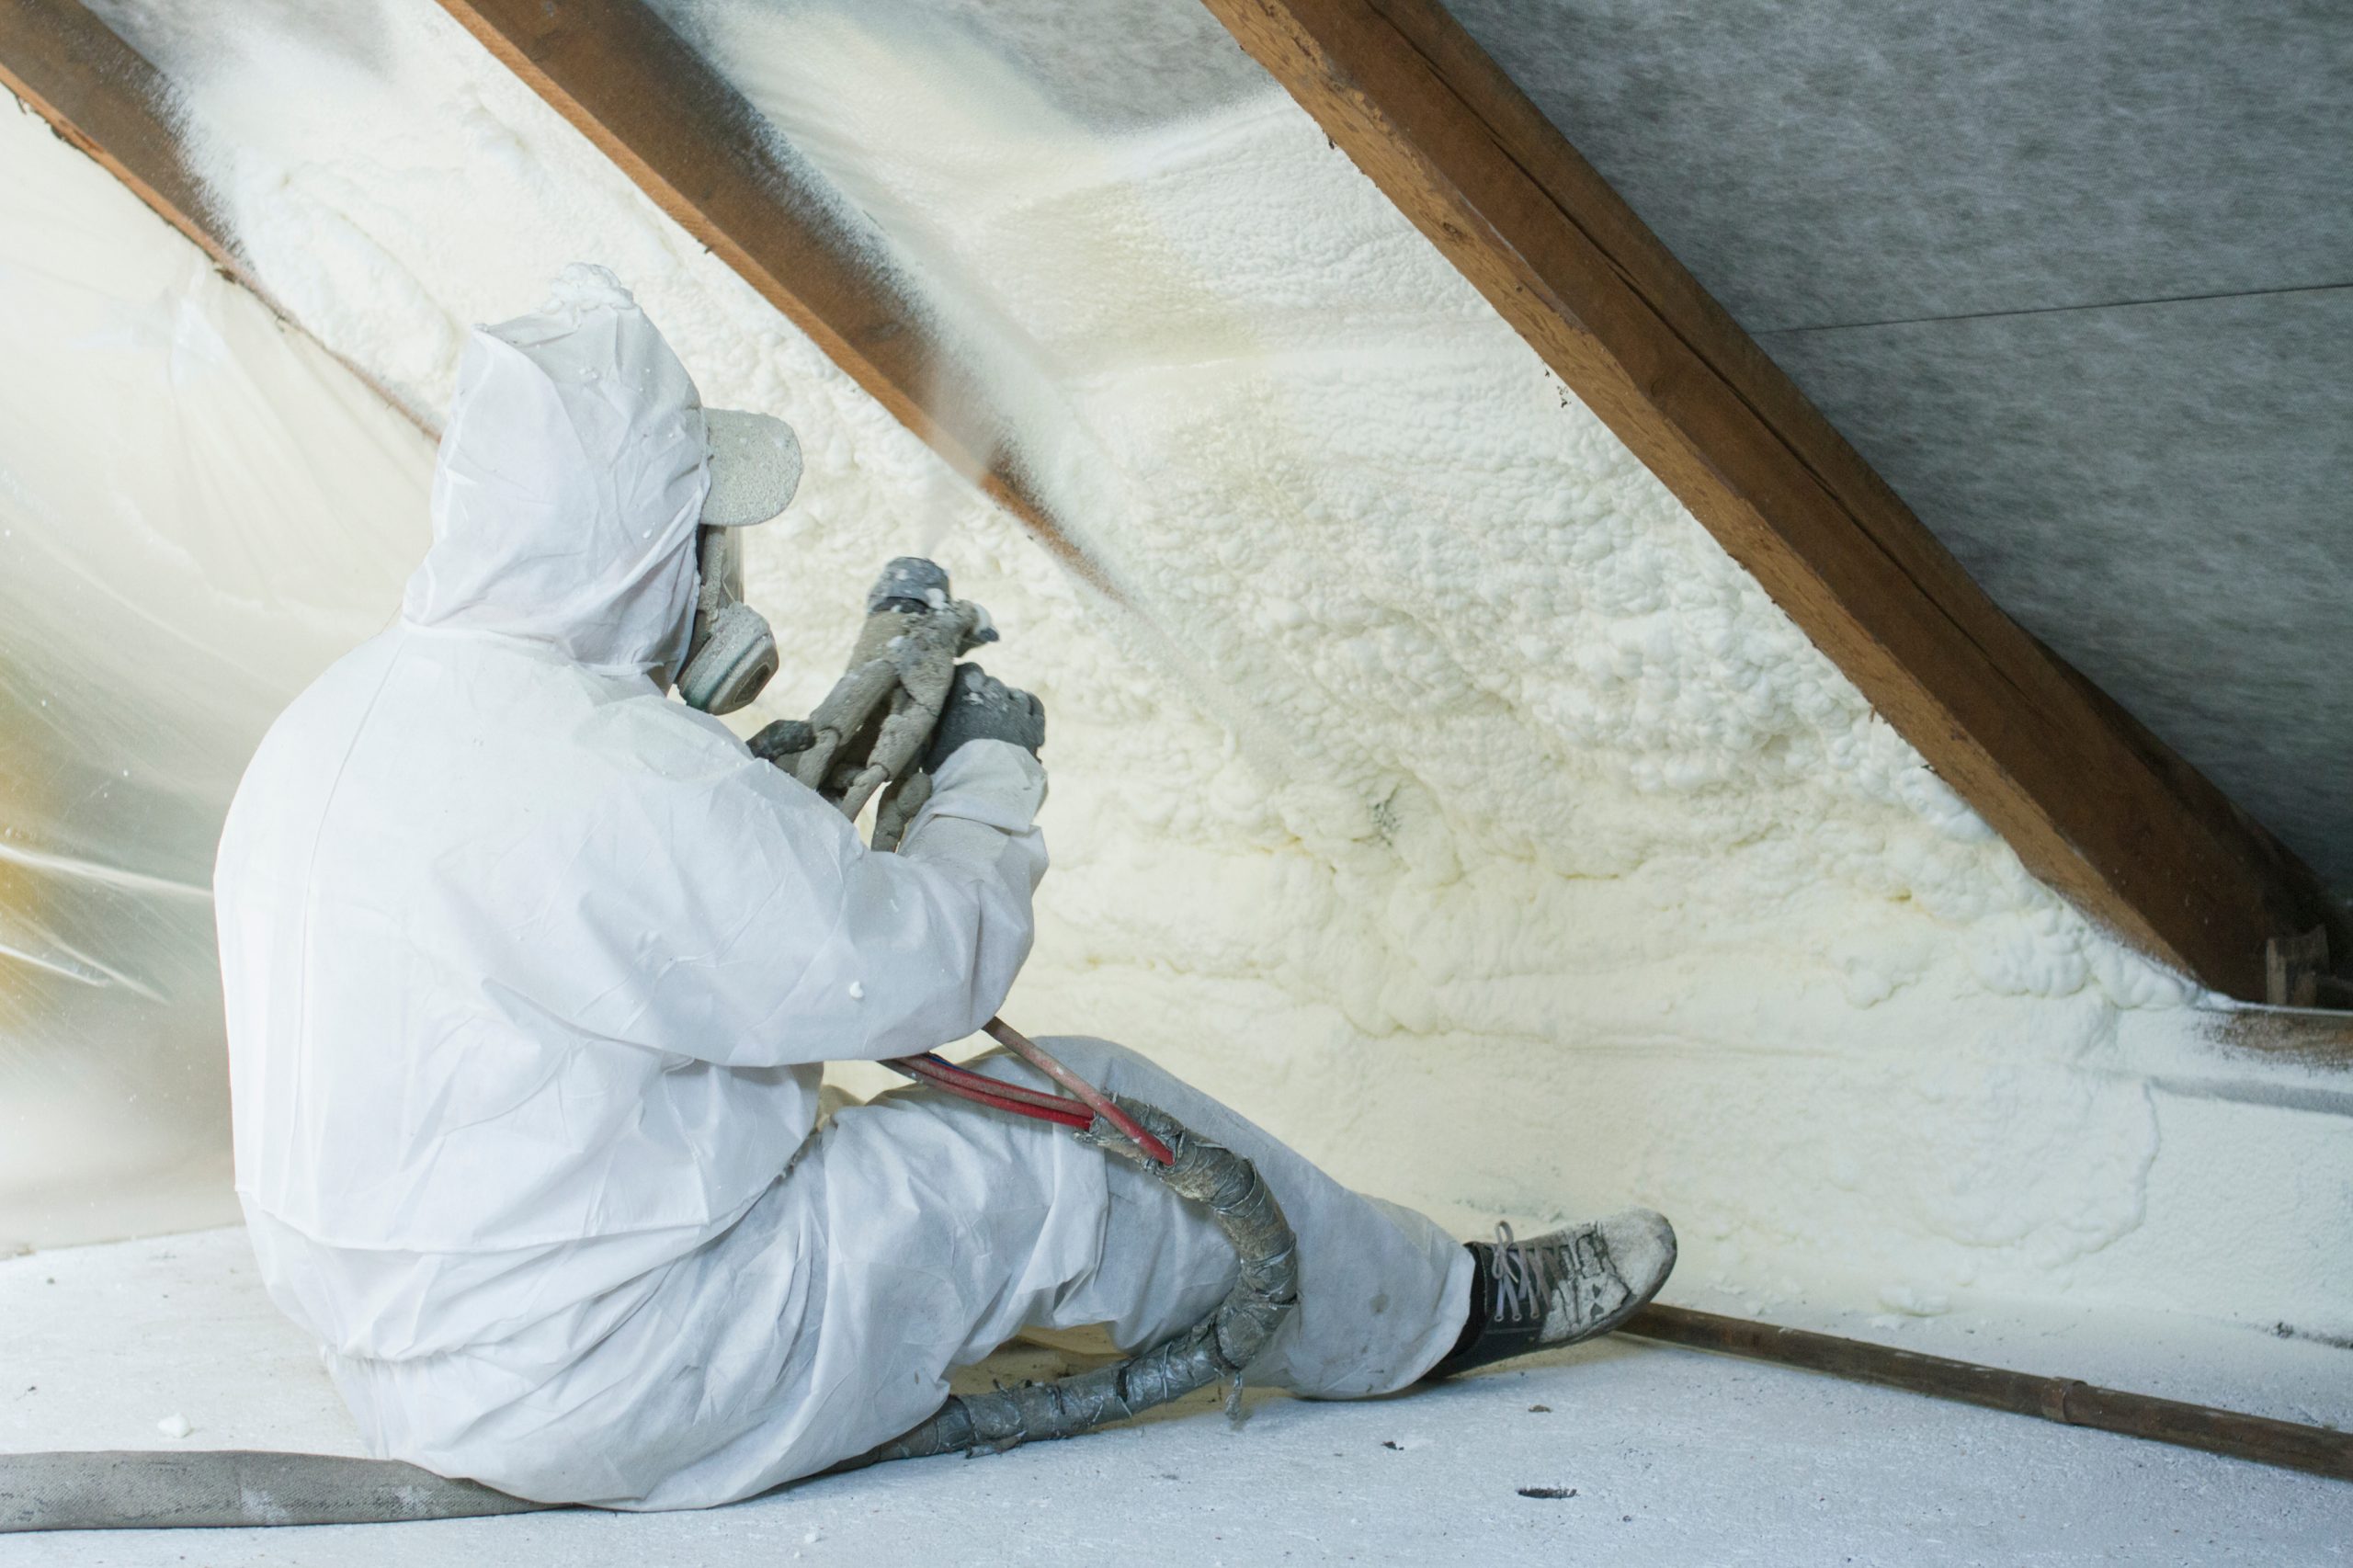 Surveyors call for regulation of the spray foam industry